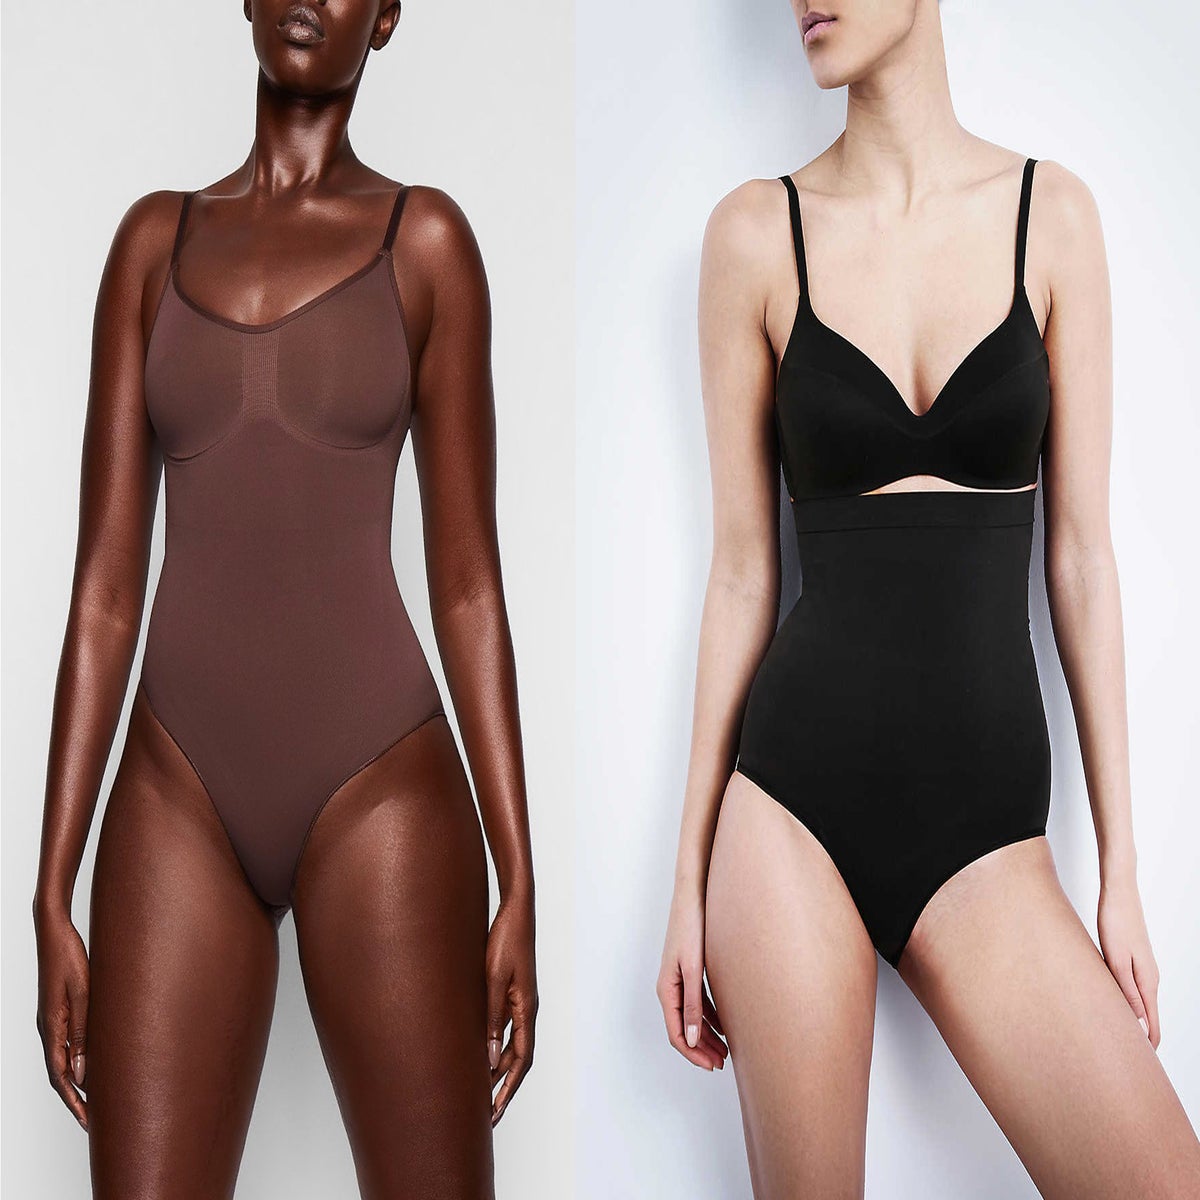 Shapewear Olympics: Pinsy! Snatched Waist? Find the Best Bodysuit